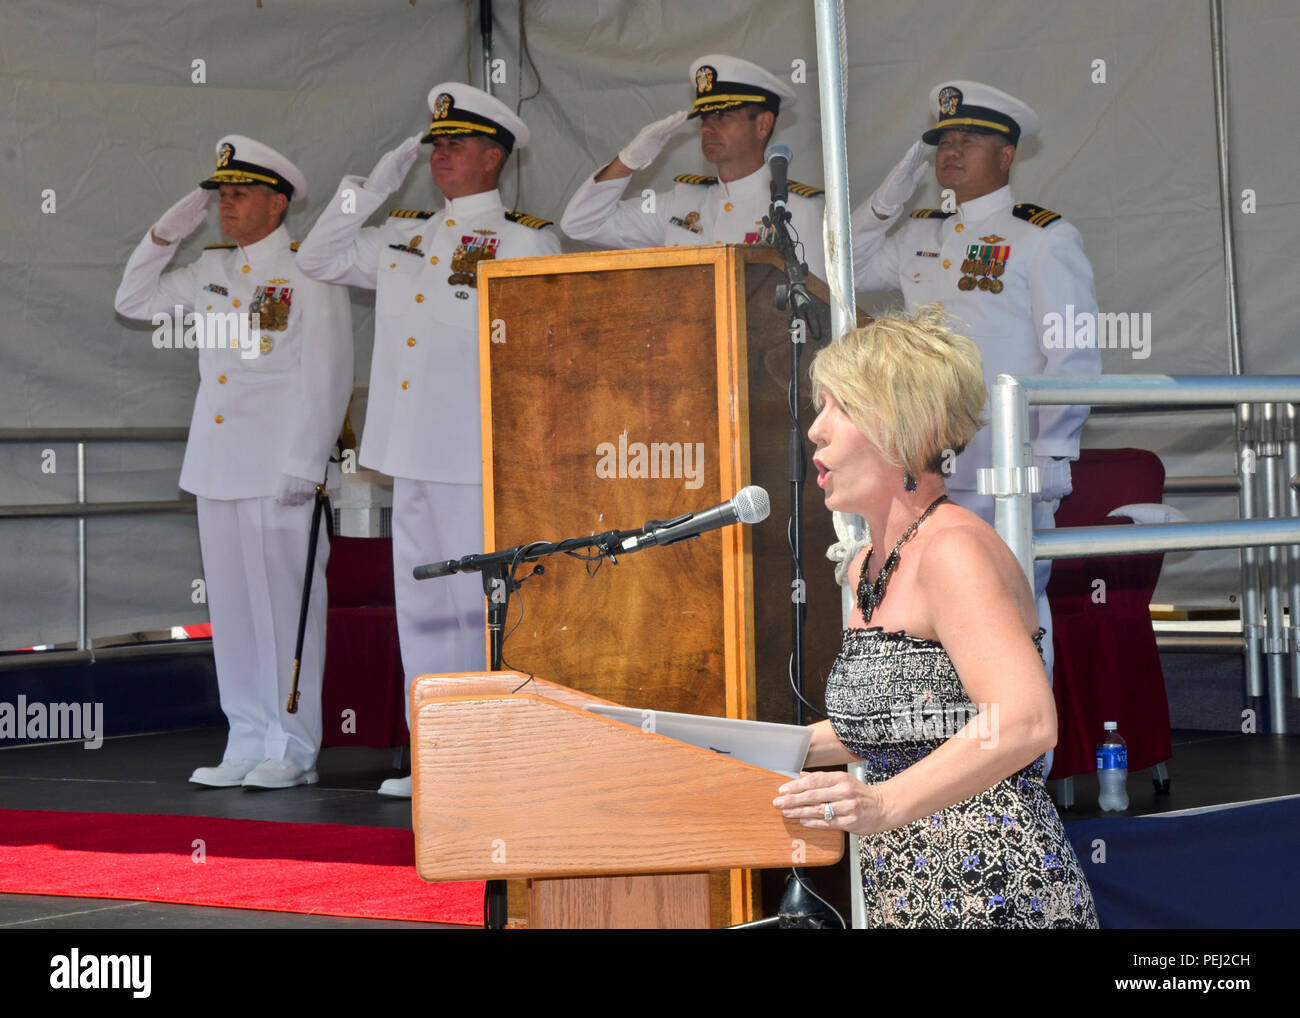 150826-N-YM720-028 POLARIS POINT, Guam (Aug. 26, 2015) Krista Callahan sings the national anthem during a change of command ceremony for the submarine tender USS Frank Cable (AS 40). During the ceremony, Capt. Mark Benjamin, middle left, was relieved by Capt. Andrew St. John, middle right, as commanding officer of Frank Cable.  Frank Cable, forward deployed to the island of Guam, conducts maintenance and support of submarines and surface vessels deployed in the U.S. 7th Fleet area of responsibility.    (U.S. Navy photo by Mass Communication Specialist 3rd Class Allen Michael McNair) Stock Photo